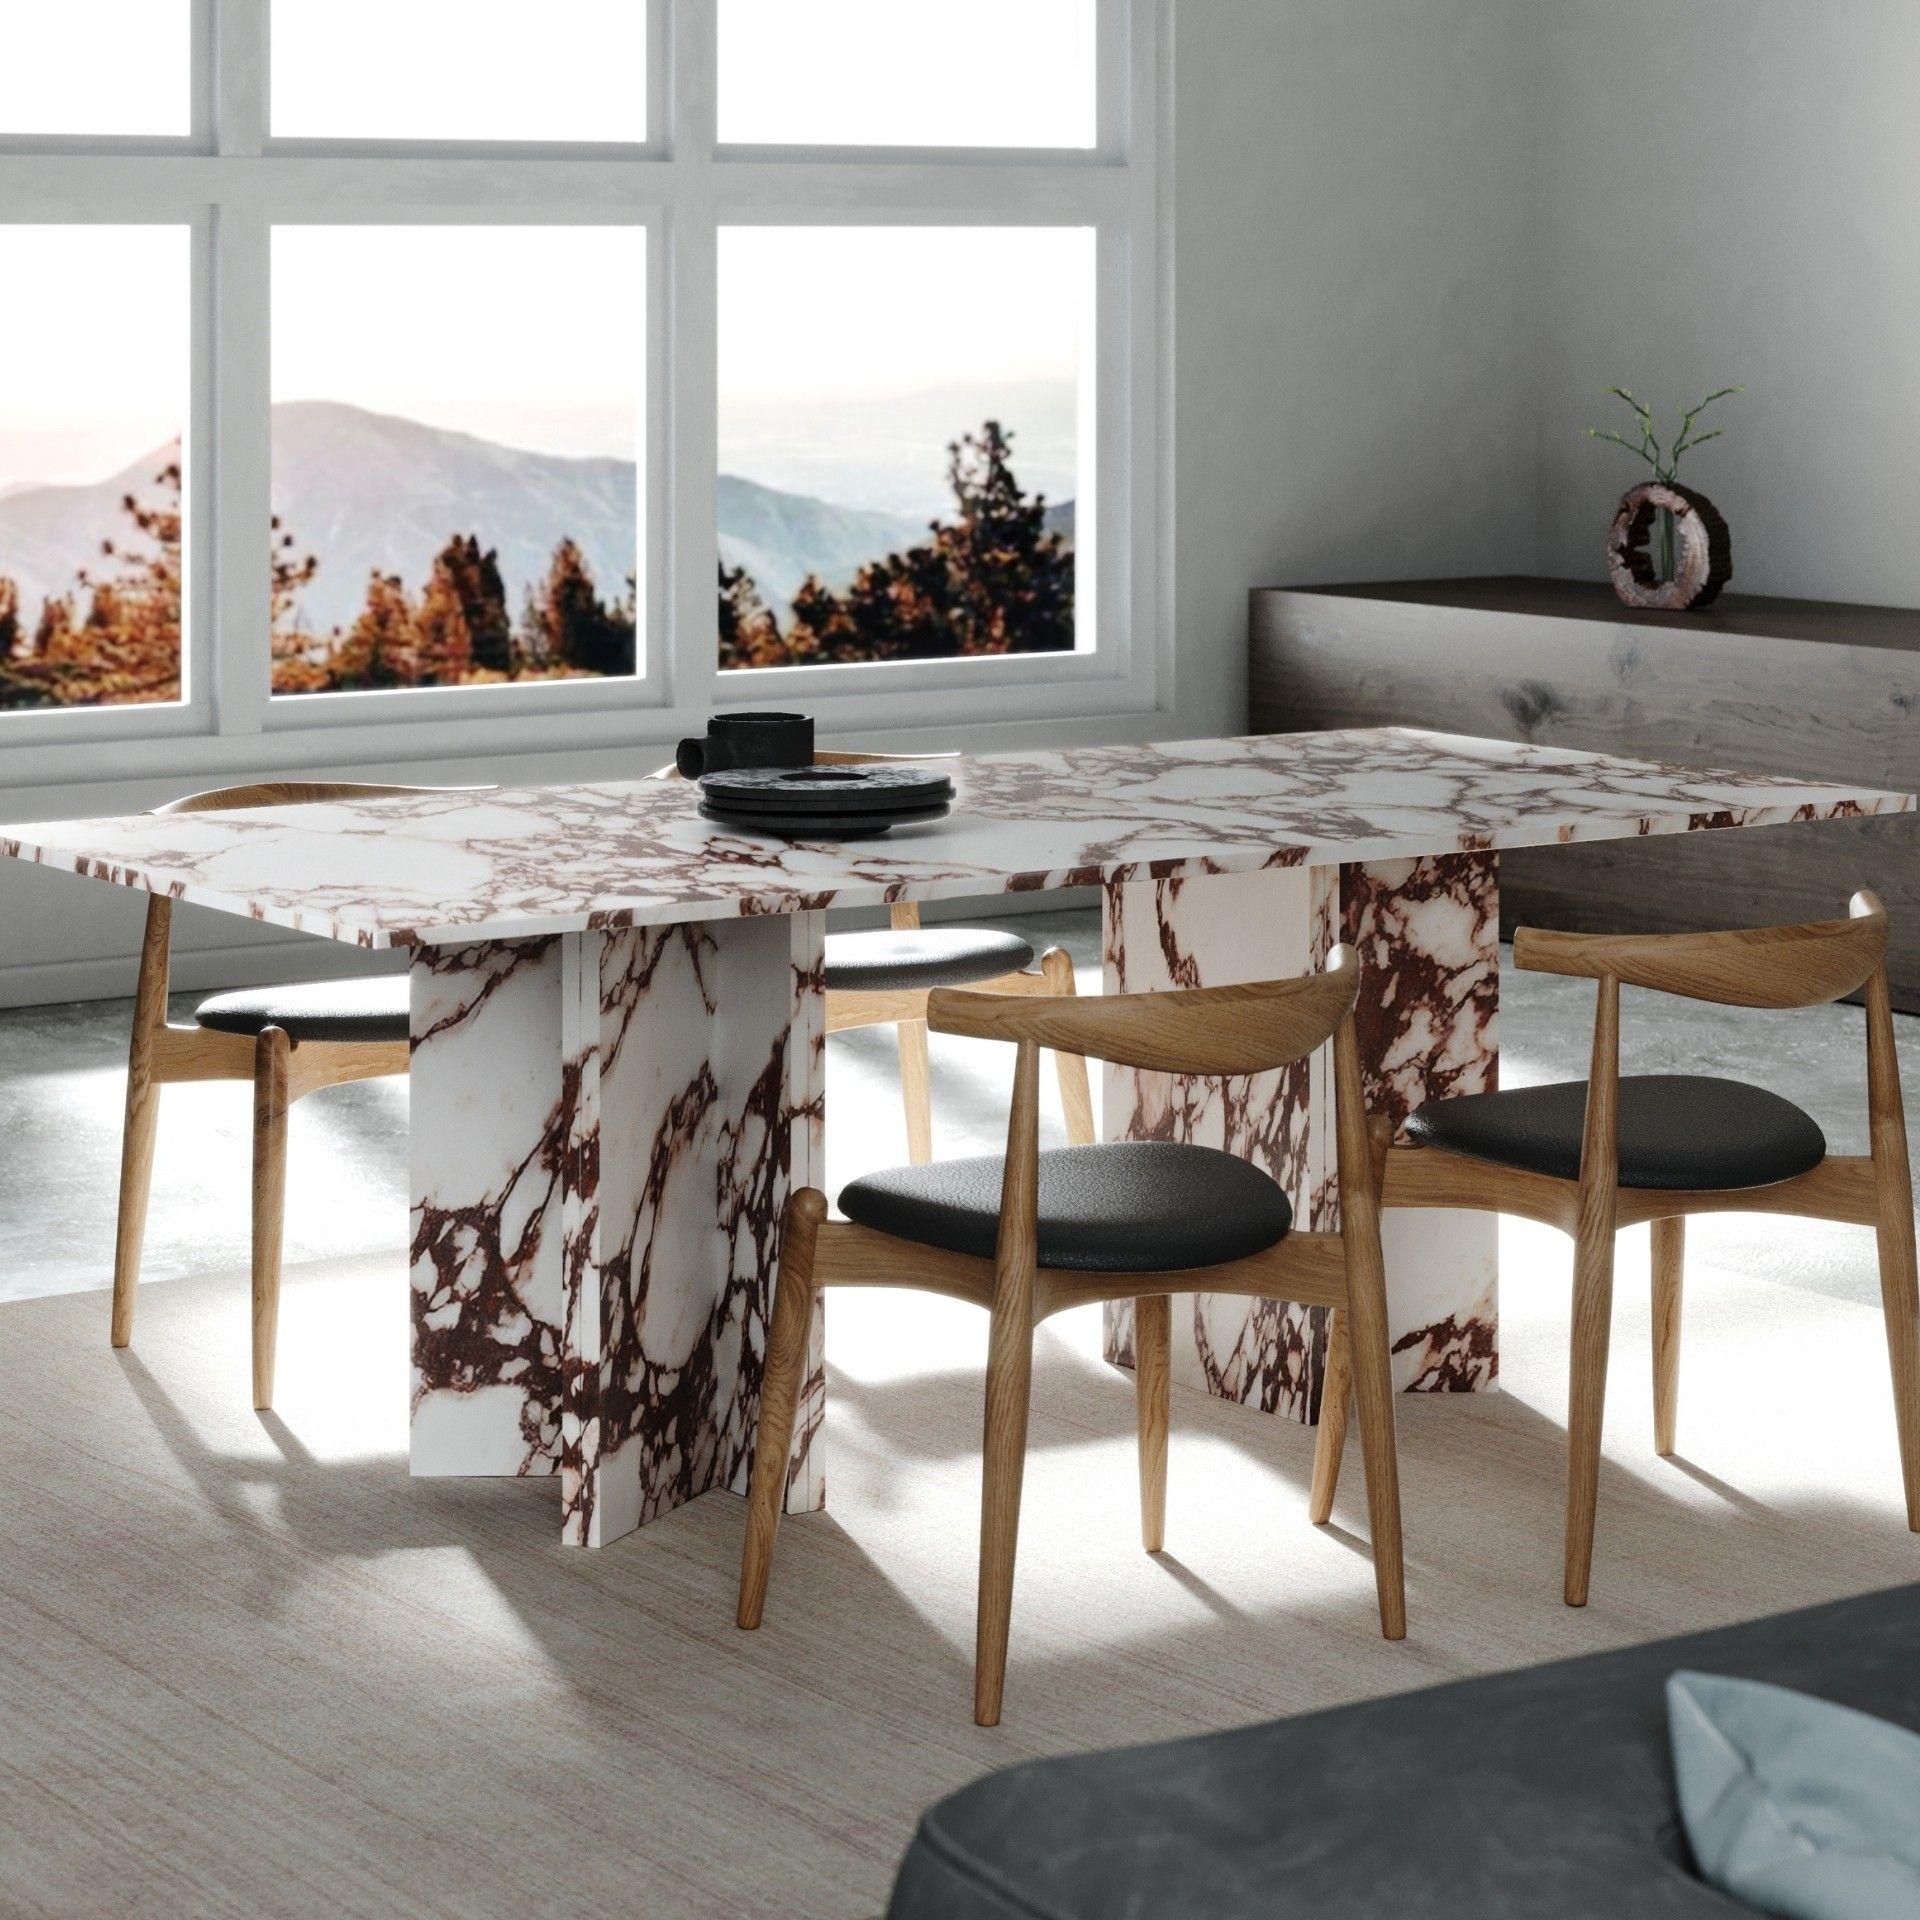 Gorgeous Dining Table in Calacata Viola Marble invites you to take a long break, without time, reinforcing the conviviality and the act of sharing in our communal daily routines. This table results from a composition of lines in rhythmic, contrast,